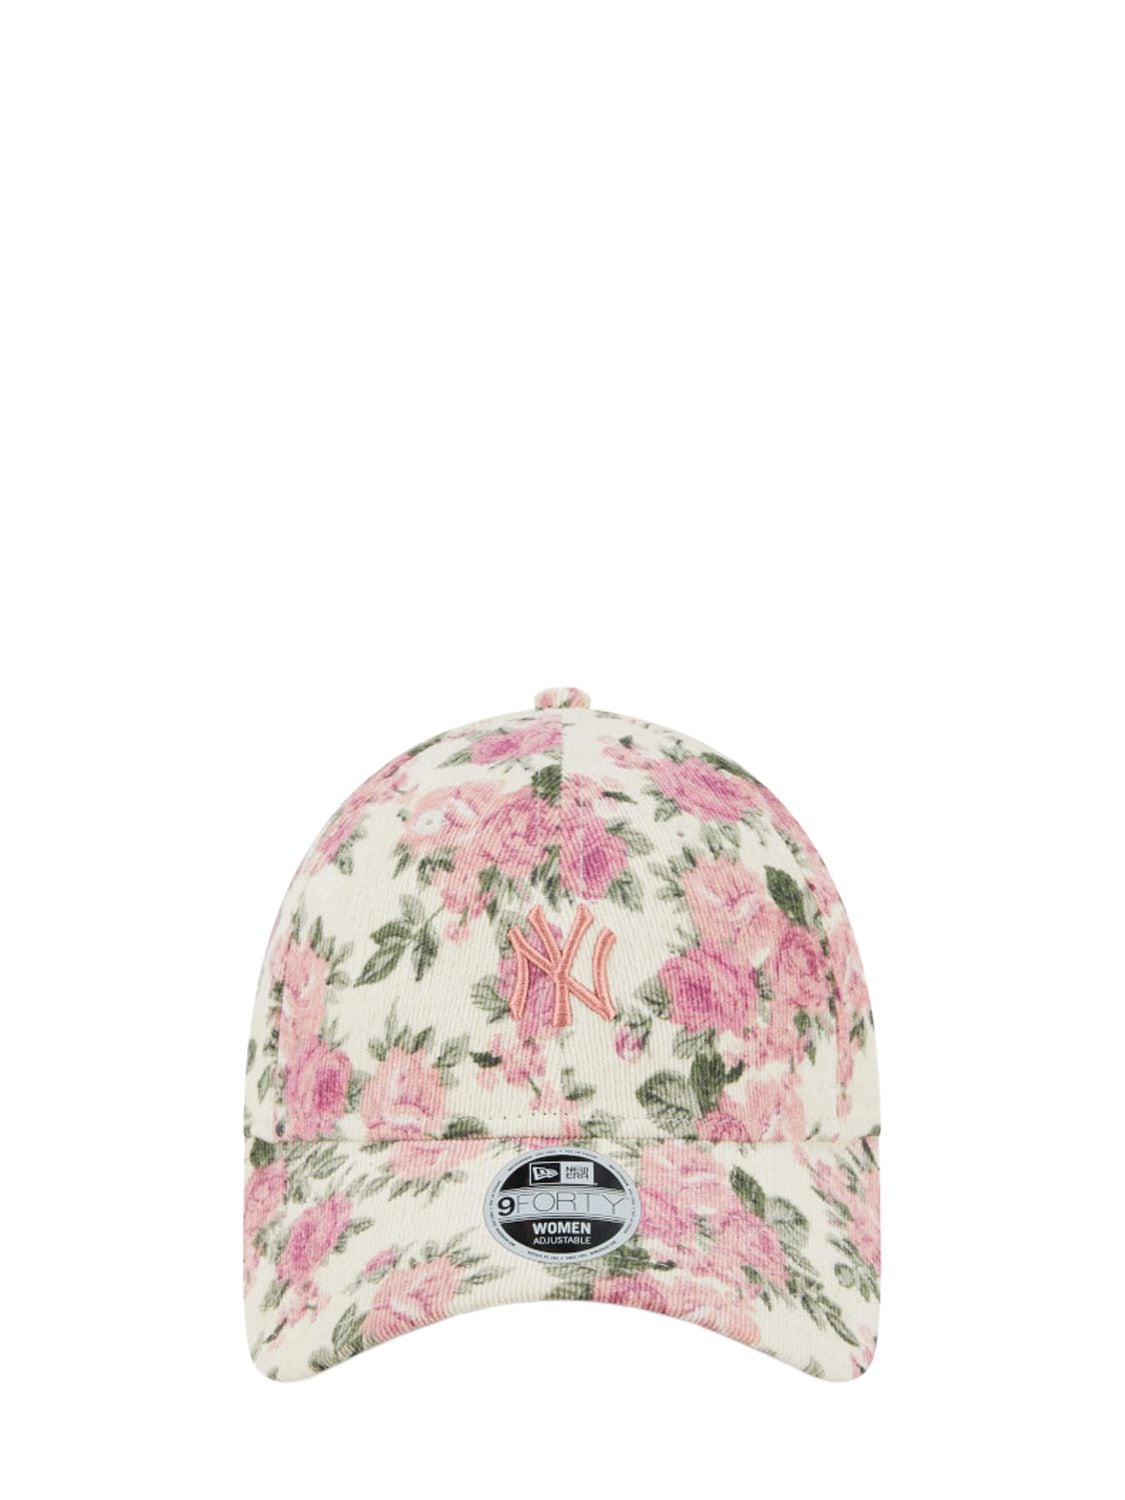 New Era 9forty Ny Yankees Floral Print Cap In Pink,white